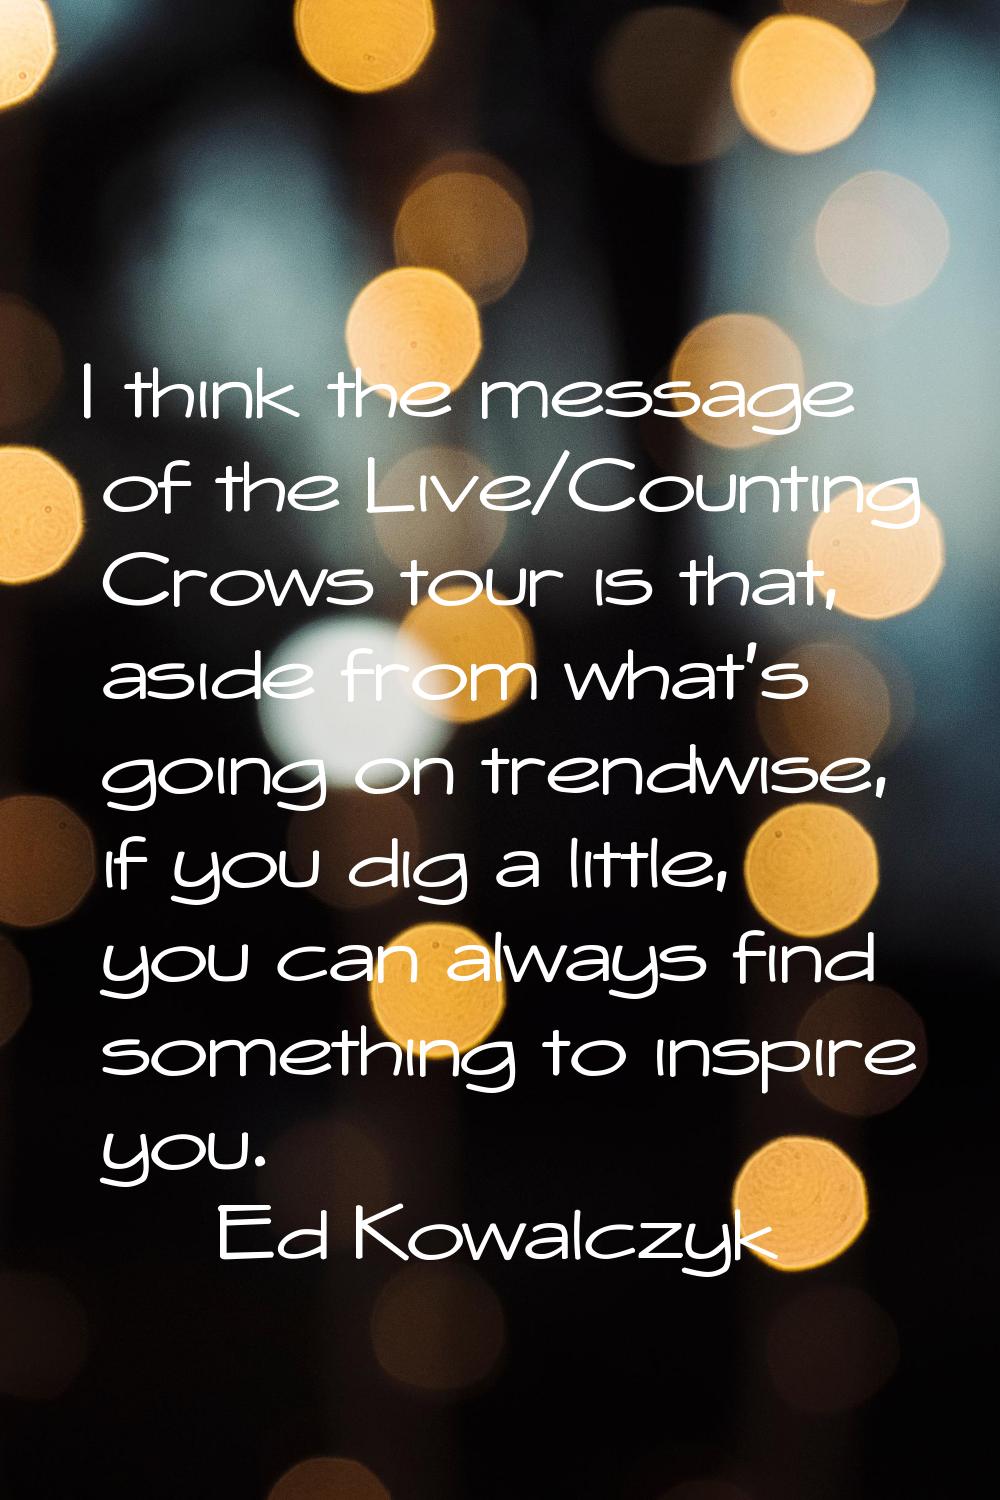 I think the message of the Live/Counting Crows tour is that, aside from what's going on trendwise, 